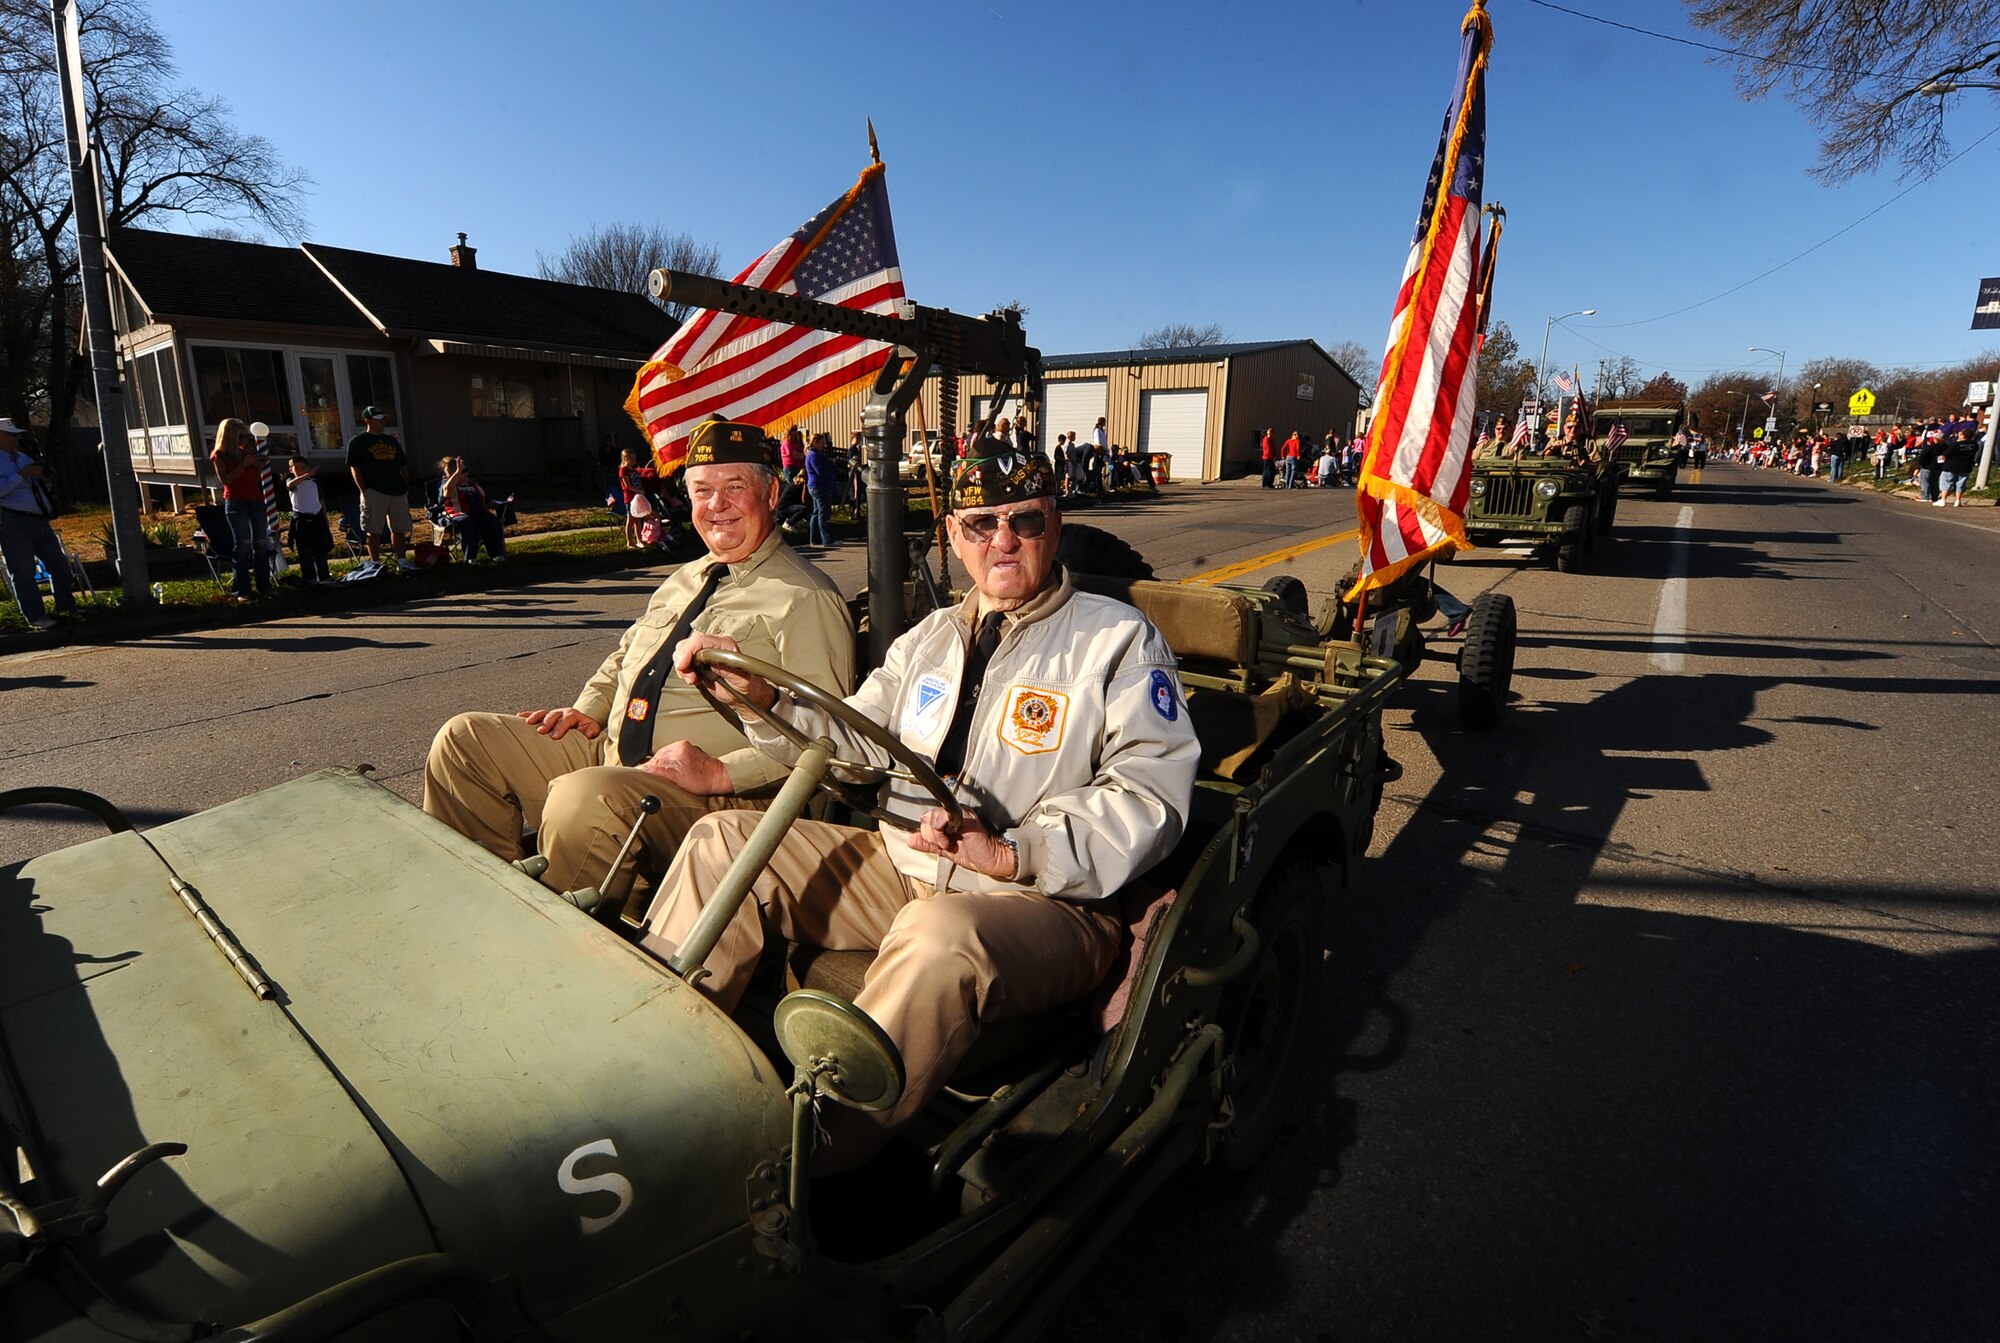 The Veterans of Foreign War Post 7064 of Tabor, Iowa, convoy through Olde Towne Bellevue as part of the Veterans Day Parade in Bellevue, Neb., Nov. 10.  A proud military heritage was on display as veterans both young and old had a chance to march in the parade.  (U.S. Air Force photo by Josh Plueger/Released)